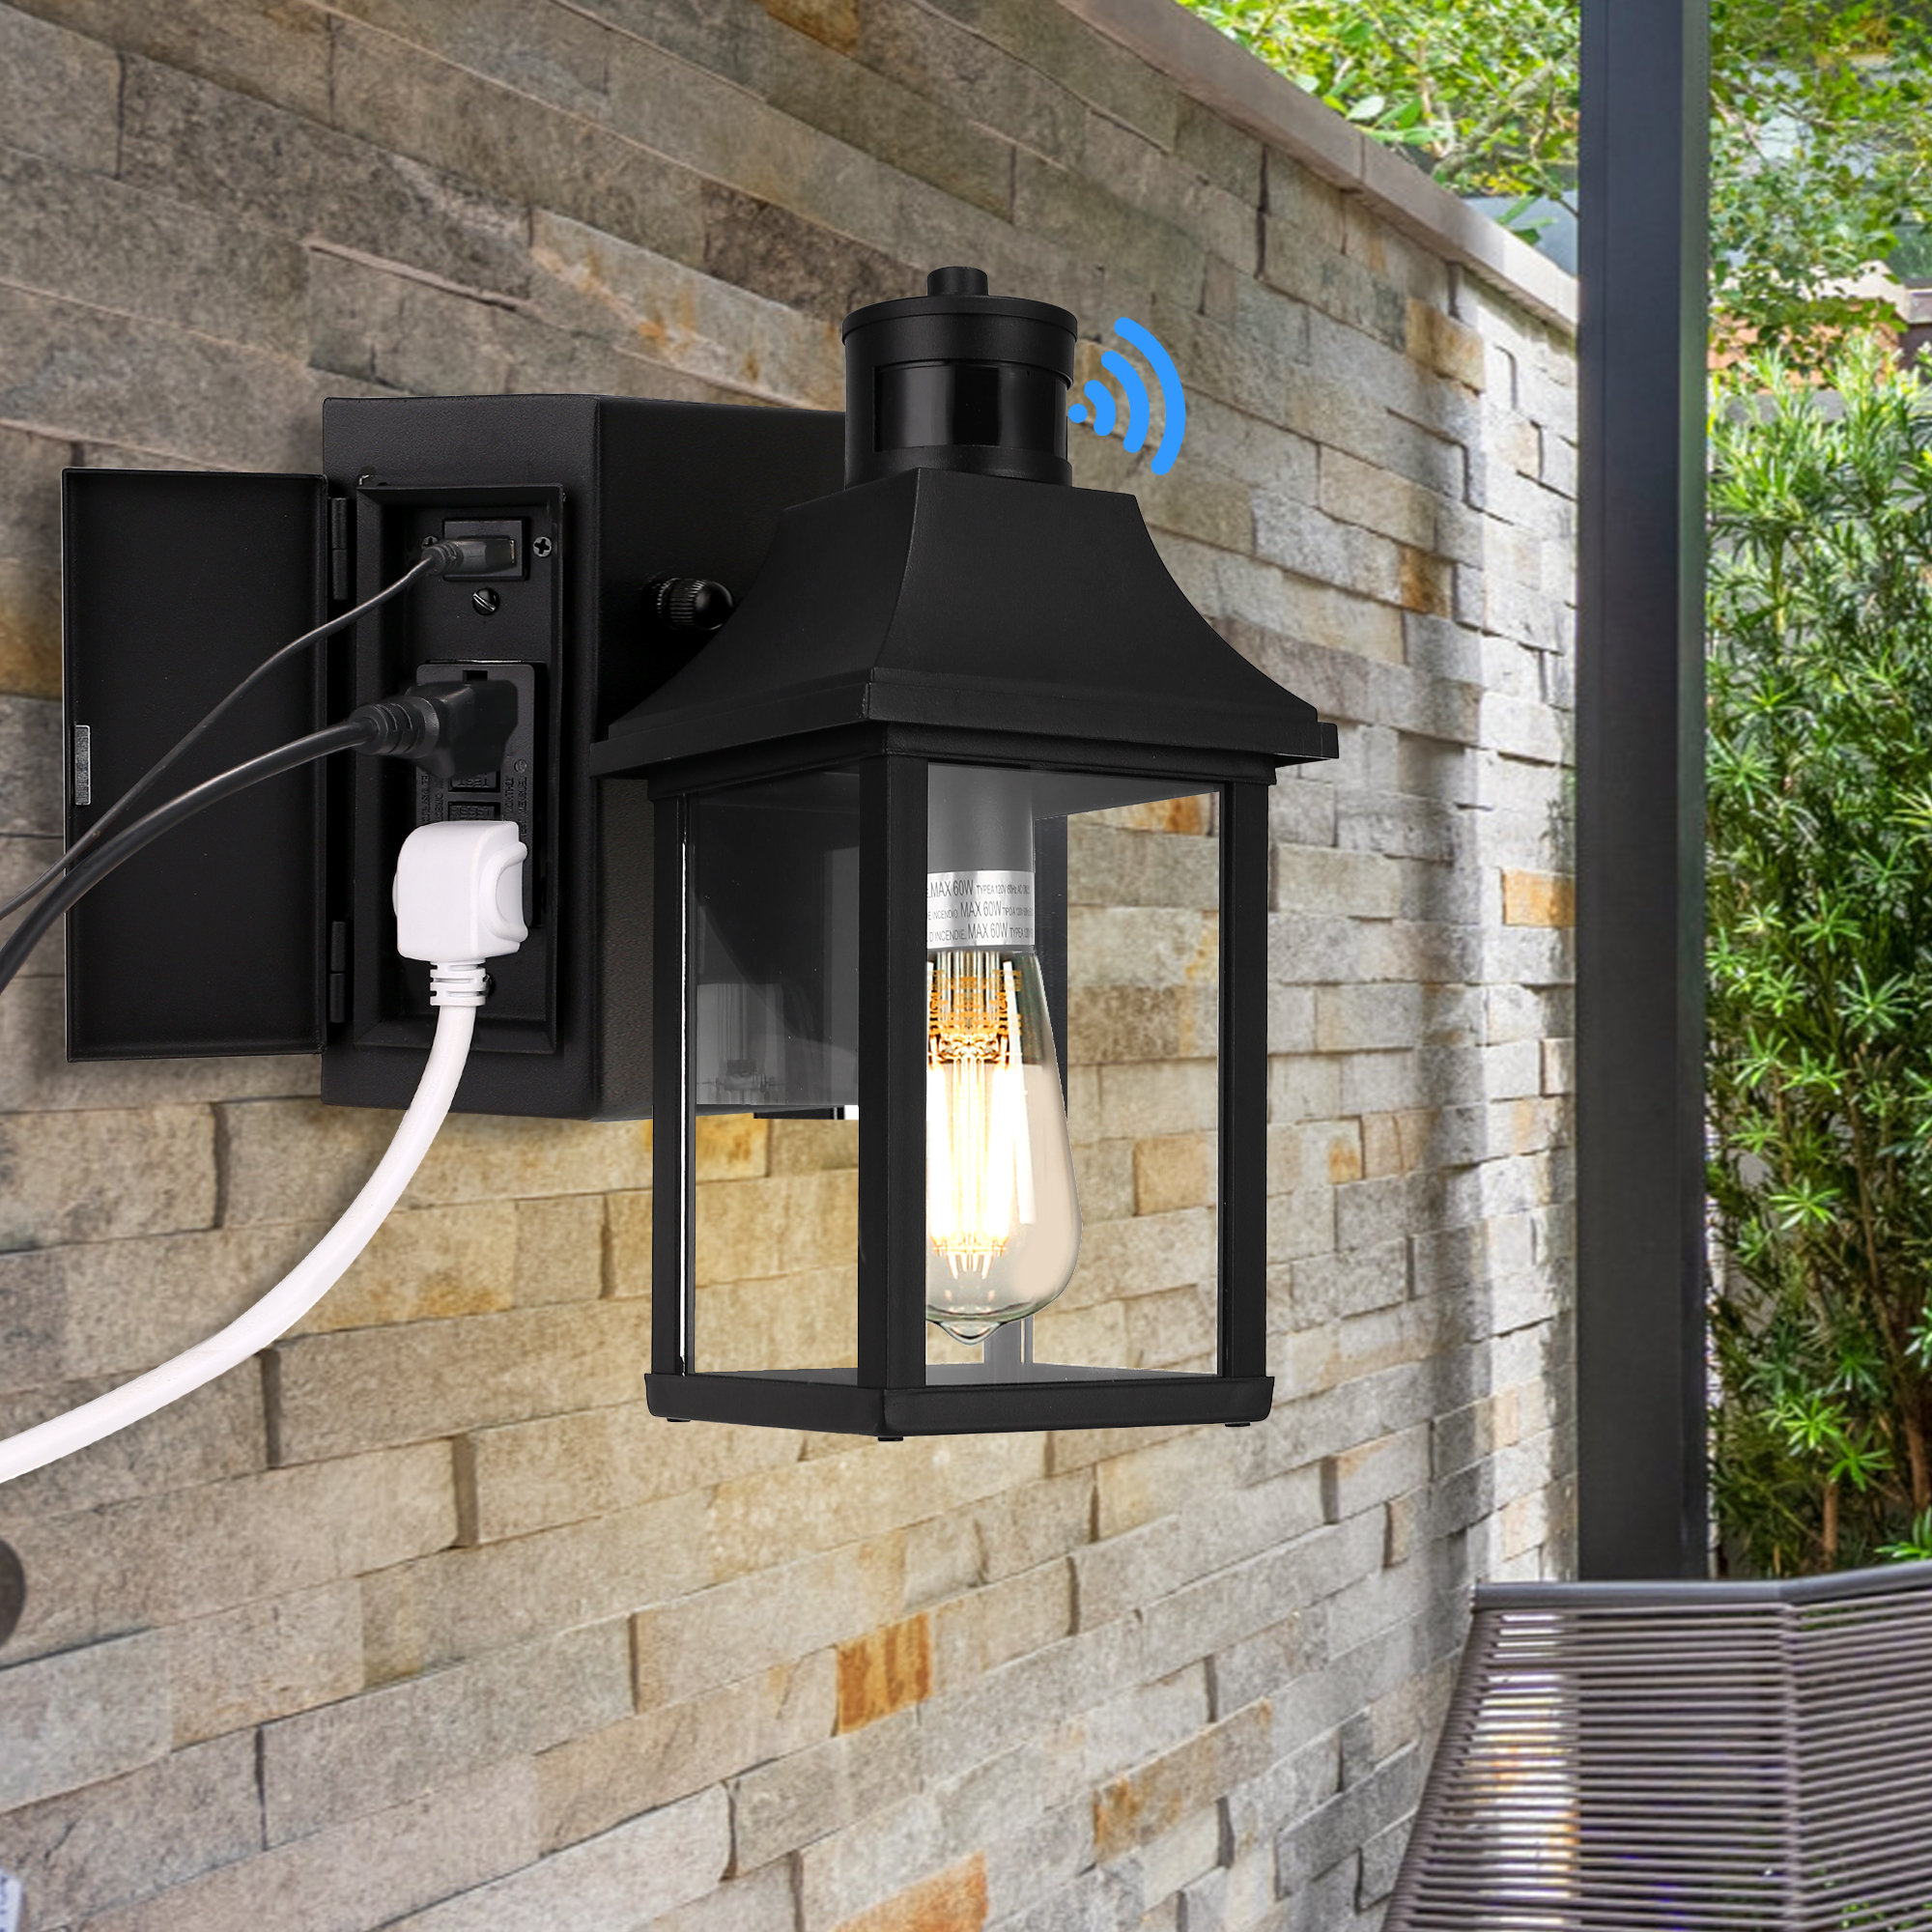 Arlmont Nyomie 1-Light Black Dusk to Dawn Motion Sensor Outdoor Wall  Lantern Sconce,Built-In GFCI and USB Outlets Wayfair